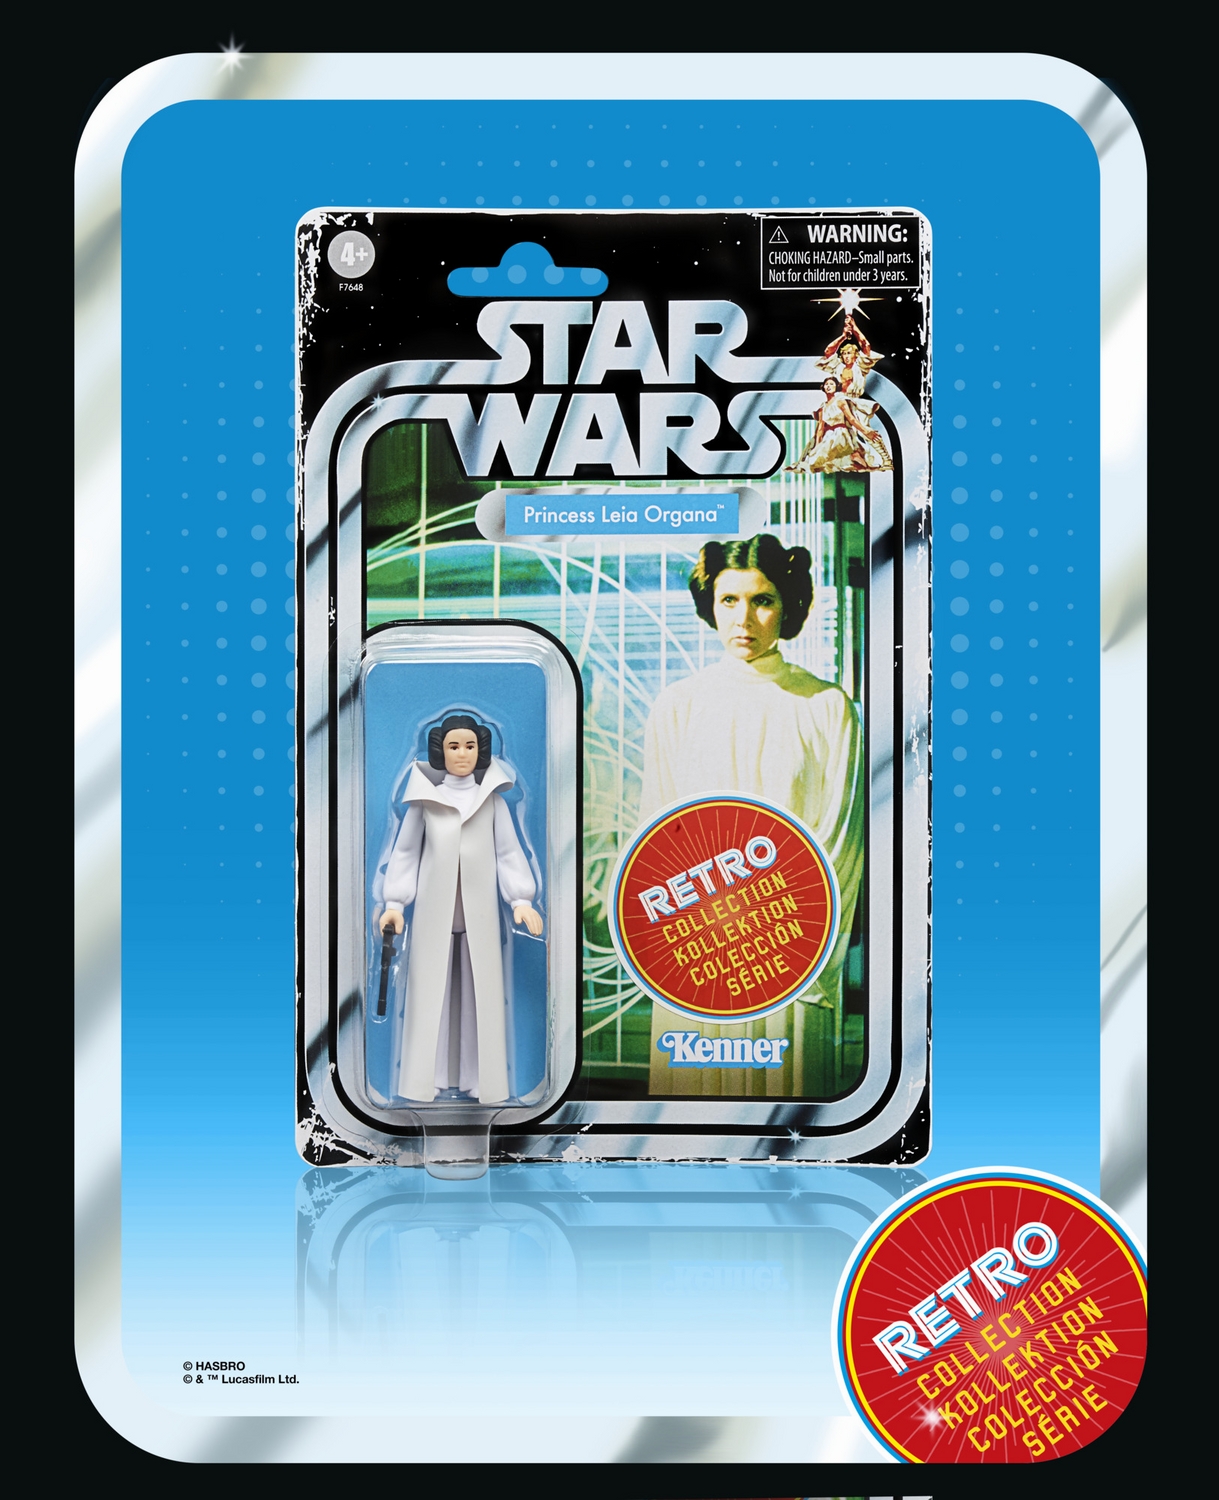 STAR WARS RETRO COLLECTION STAR WARS A NEW HOPE COLLECTIBLE MULTIPACK - 17.jpg